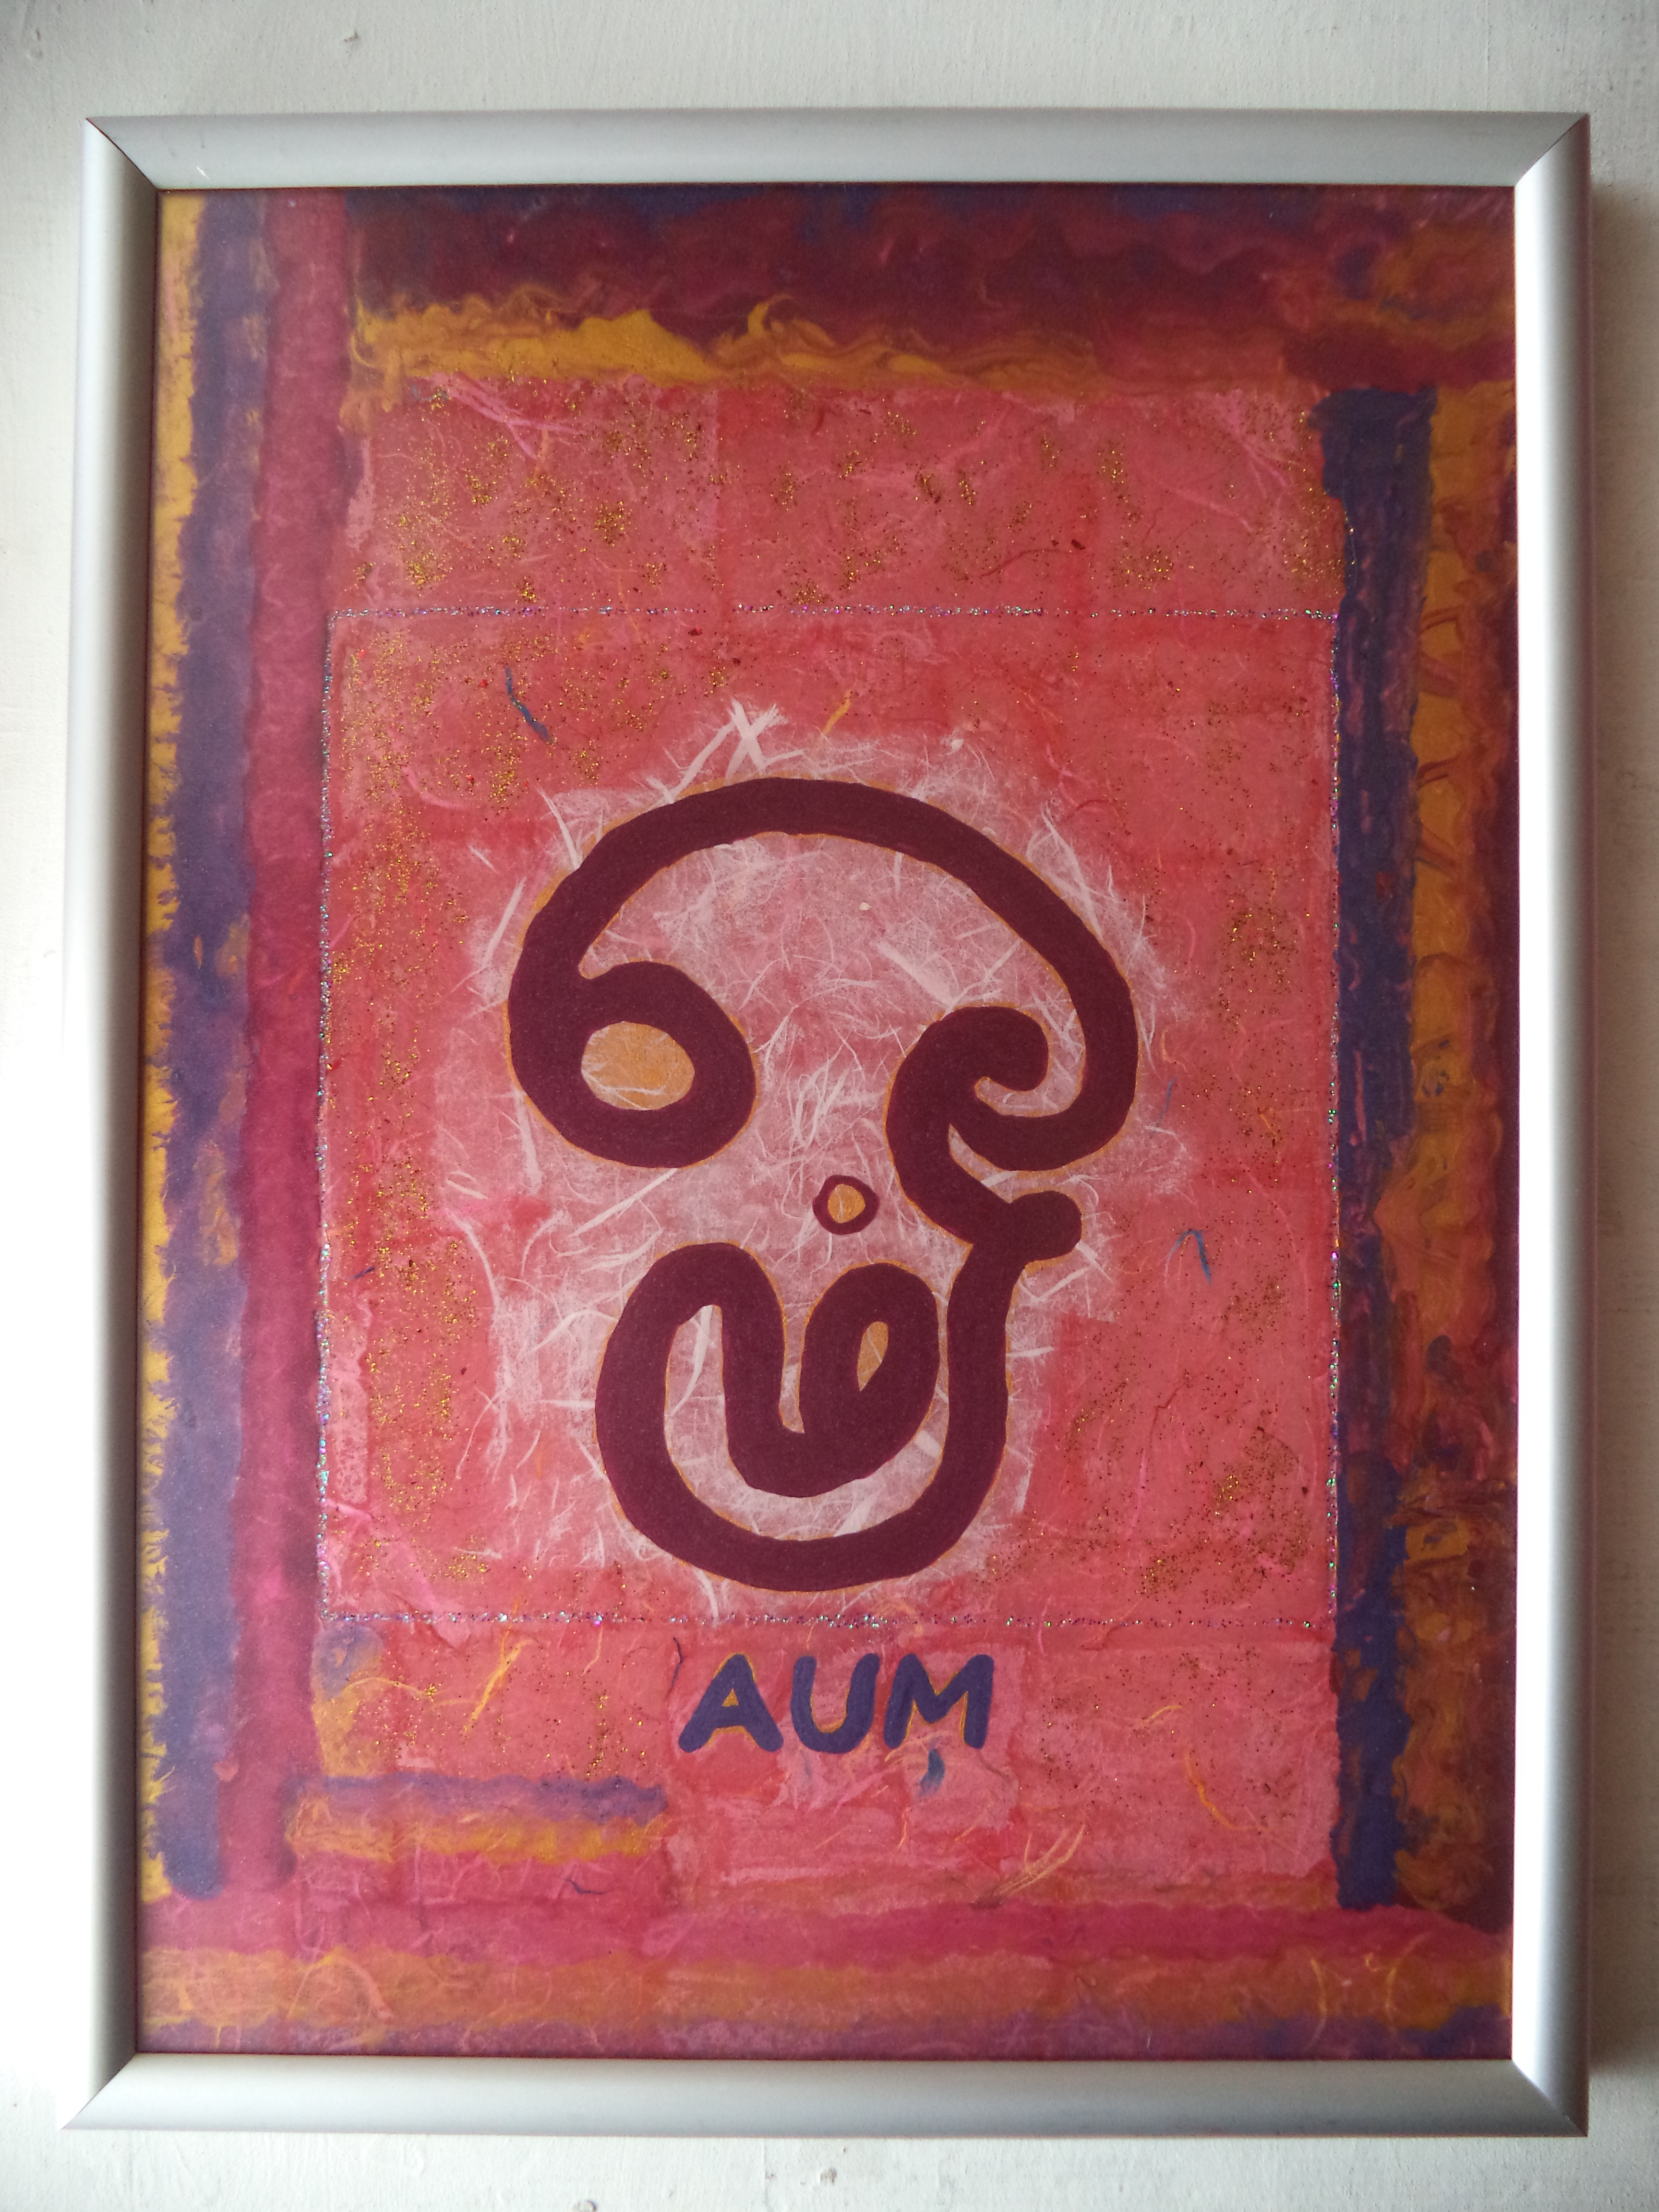 Hand-painted on Glass Aum Frame